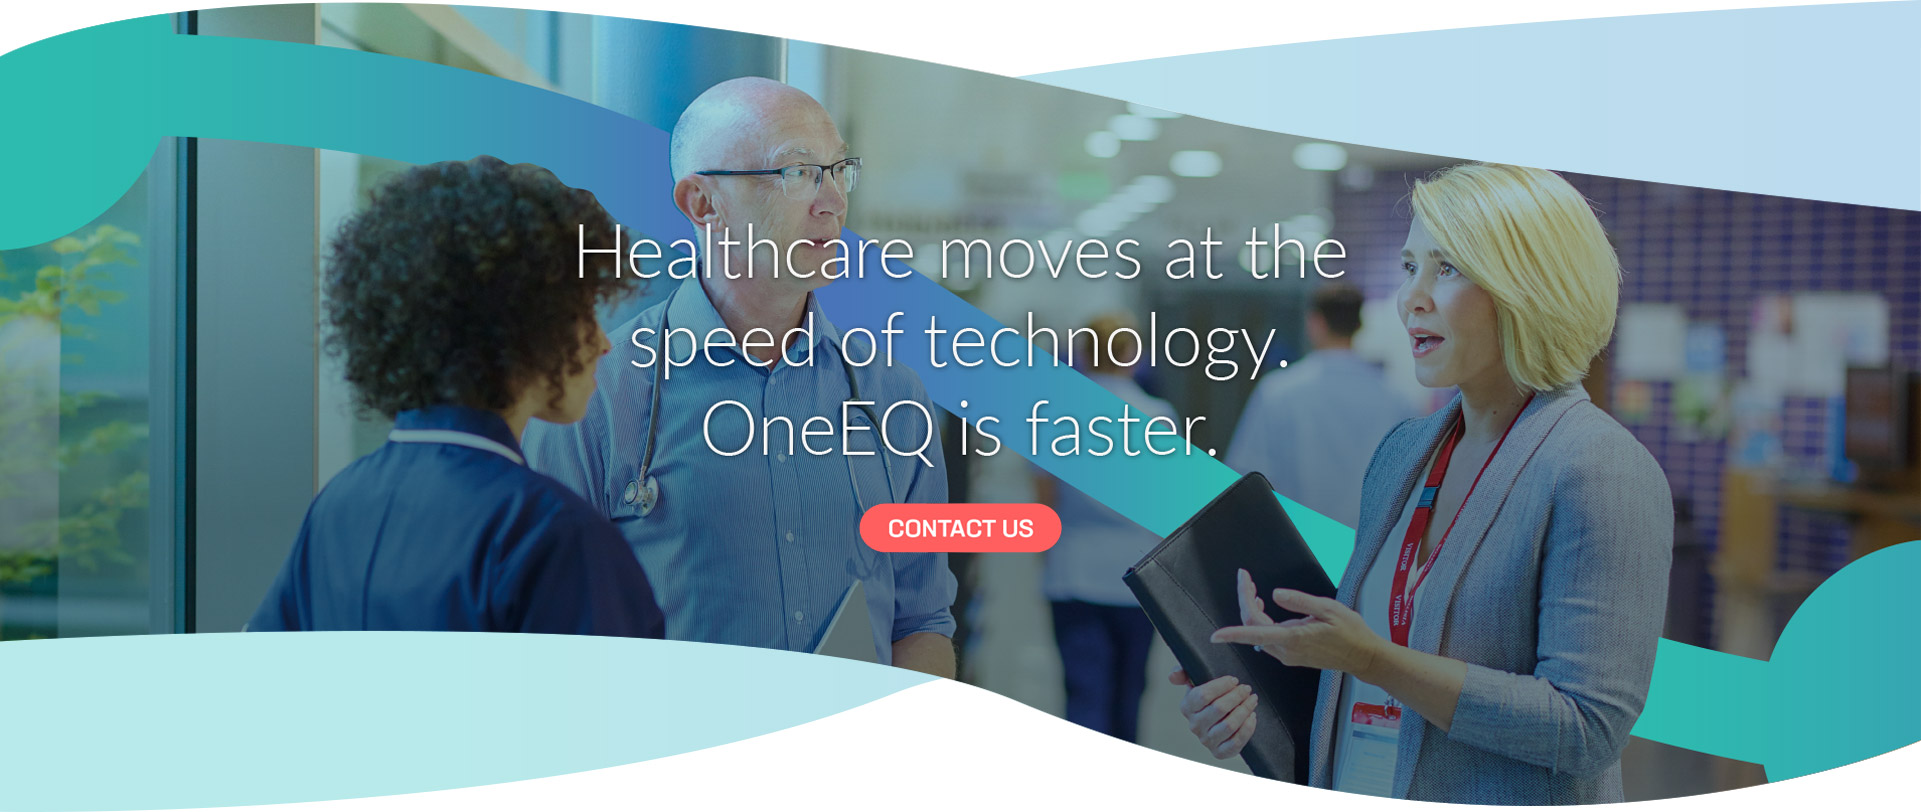 Healthcare moves at the speed of technology. OneEQ is faster.